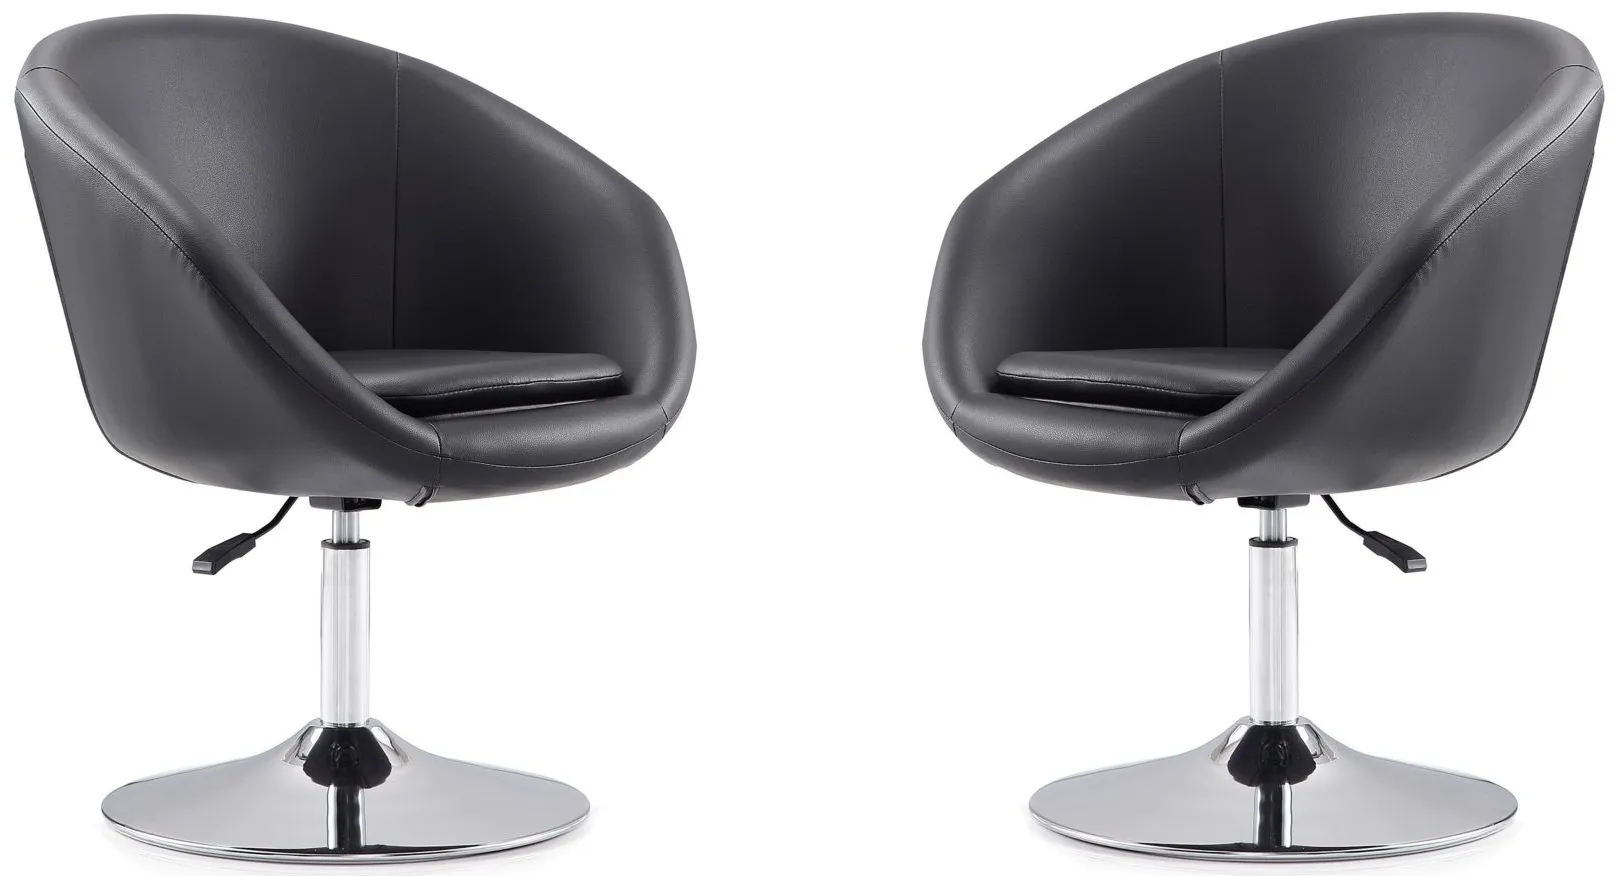 Hopper Swivel Adjustable Height Faux Leather Chair (Set of 2) in Black and Polished Chrome by Manhattan Comfort